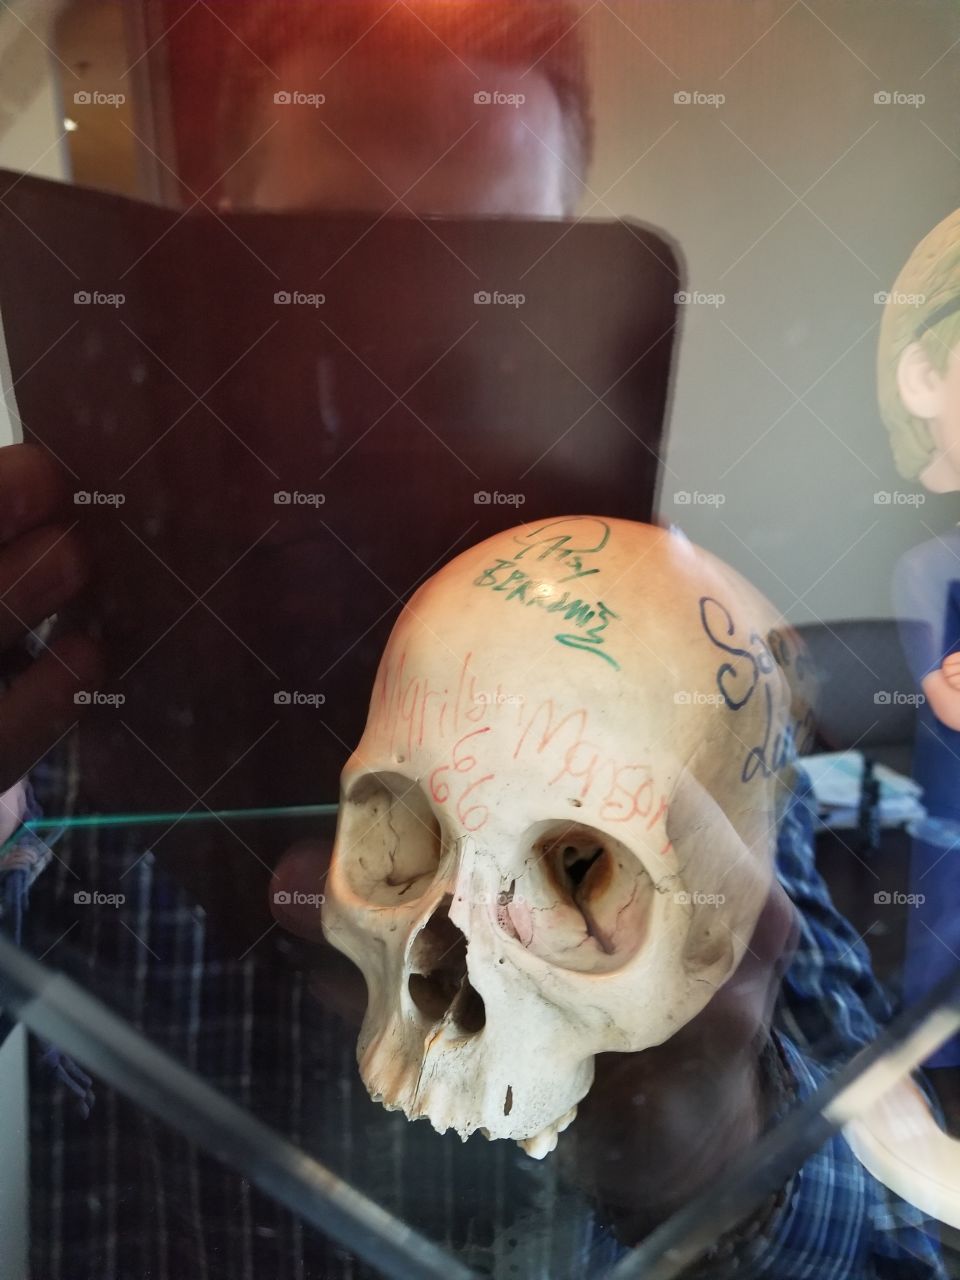 Marilyn Manson autographed real handicapped man's skull